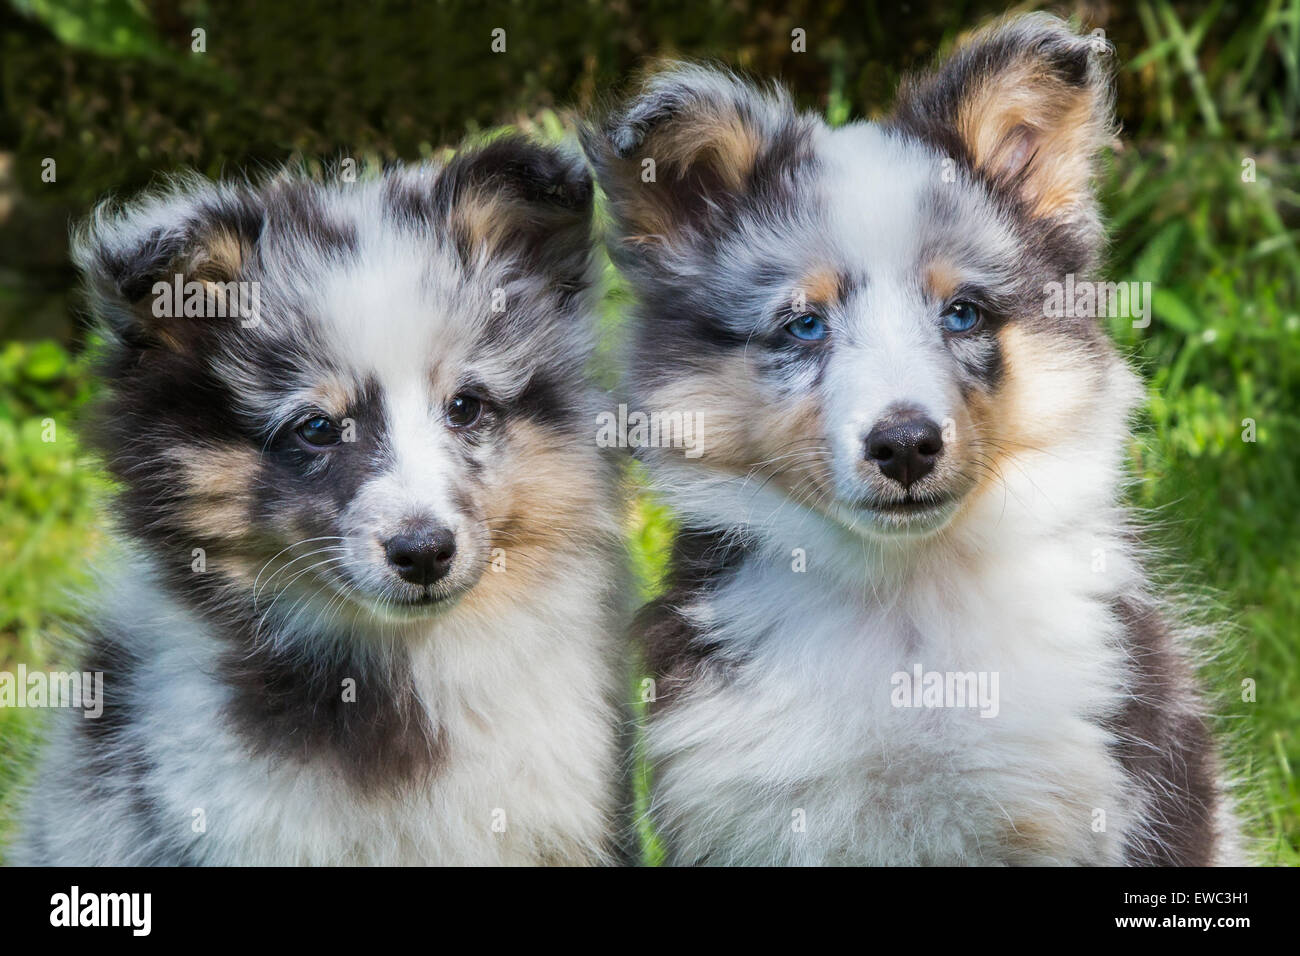 Portrait of two young sheltie dogs outdoors in garden Stock Photo